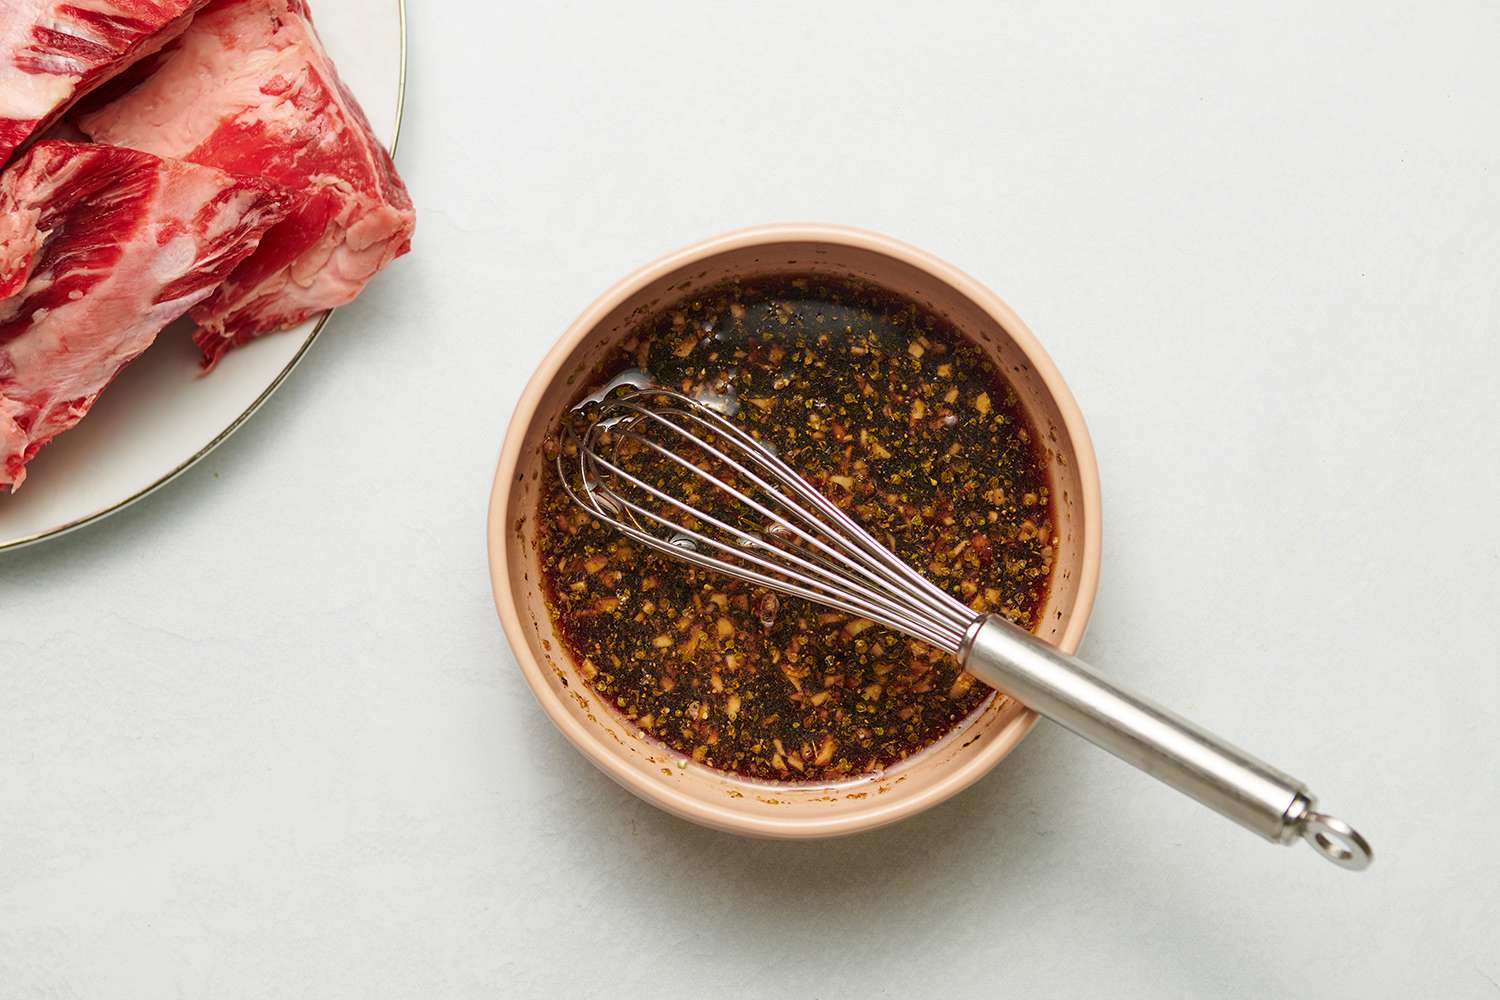 Marinade in a bowl with a metal whisk and beef ribs on a plate 